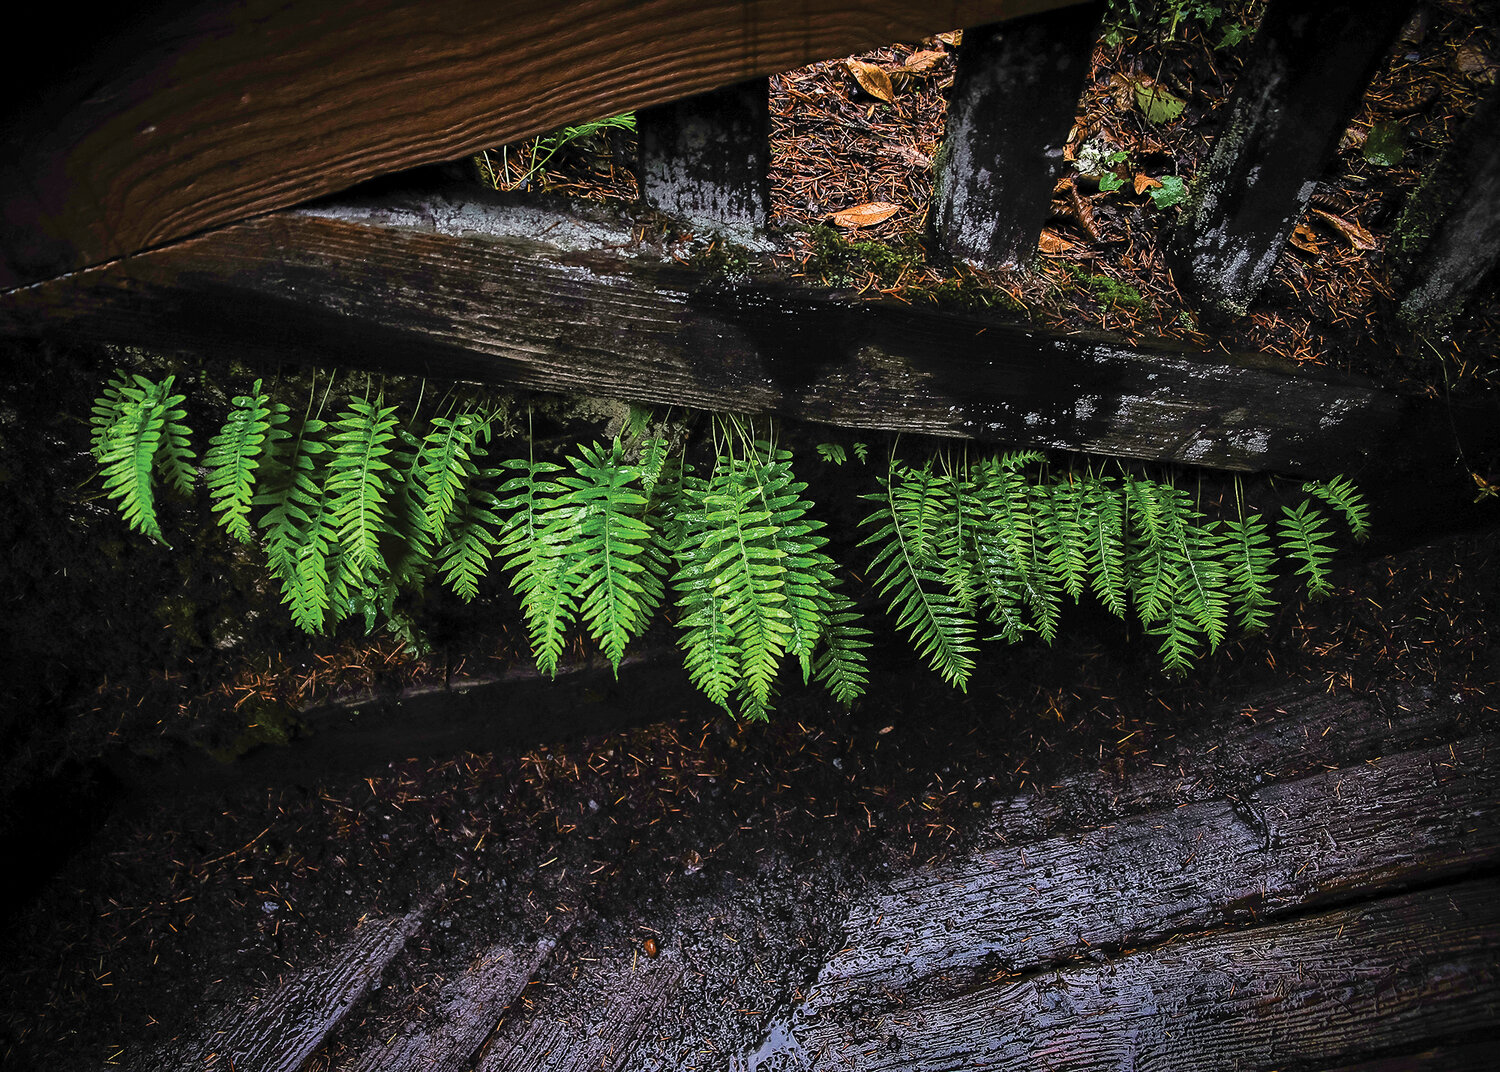 A group of licorice ferns are commonly found growing from tree trunks, but these grew out of the pedestrian bridge alongside Northeast Lucia Falls Road in Moulton Falls Regional Park on Monday, Oct. 2